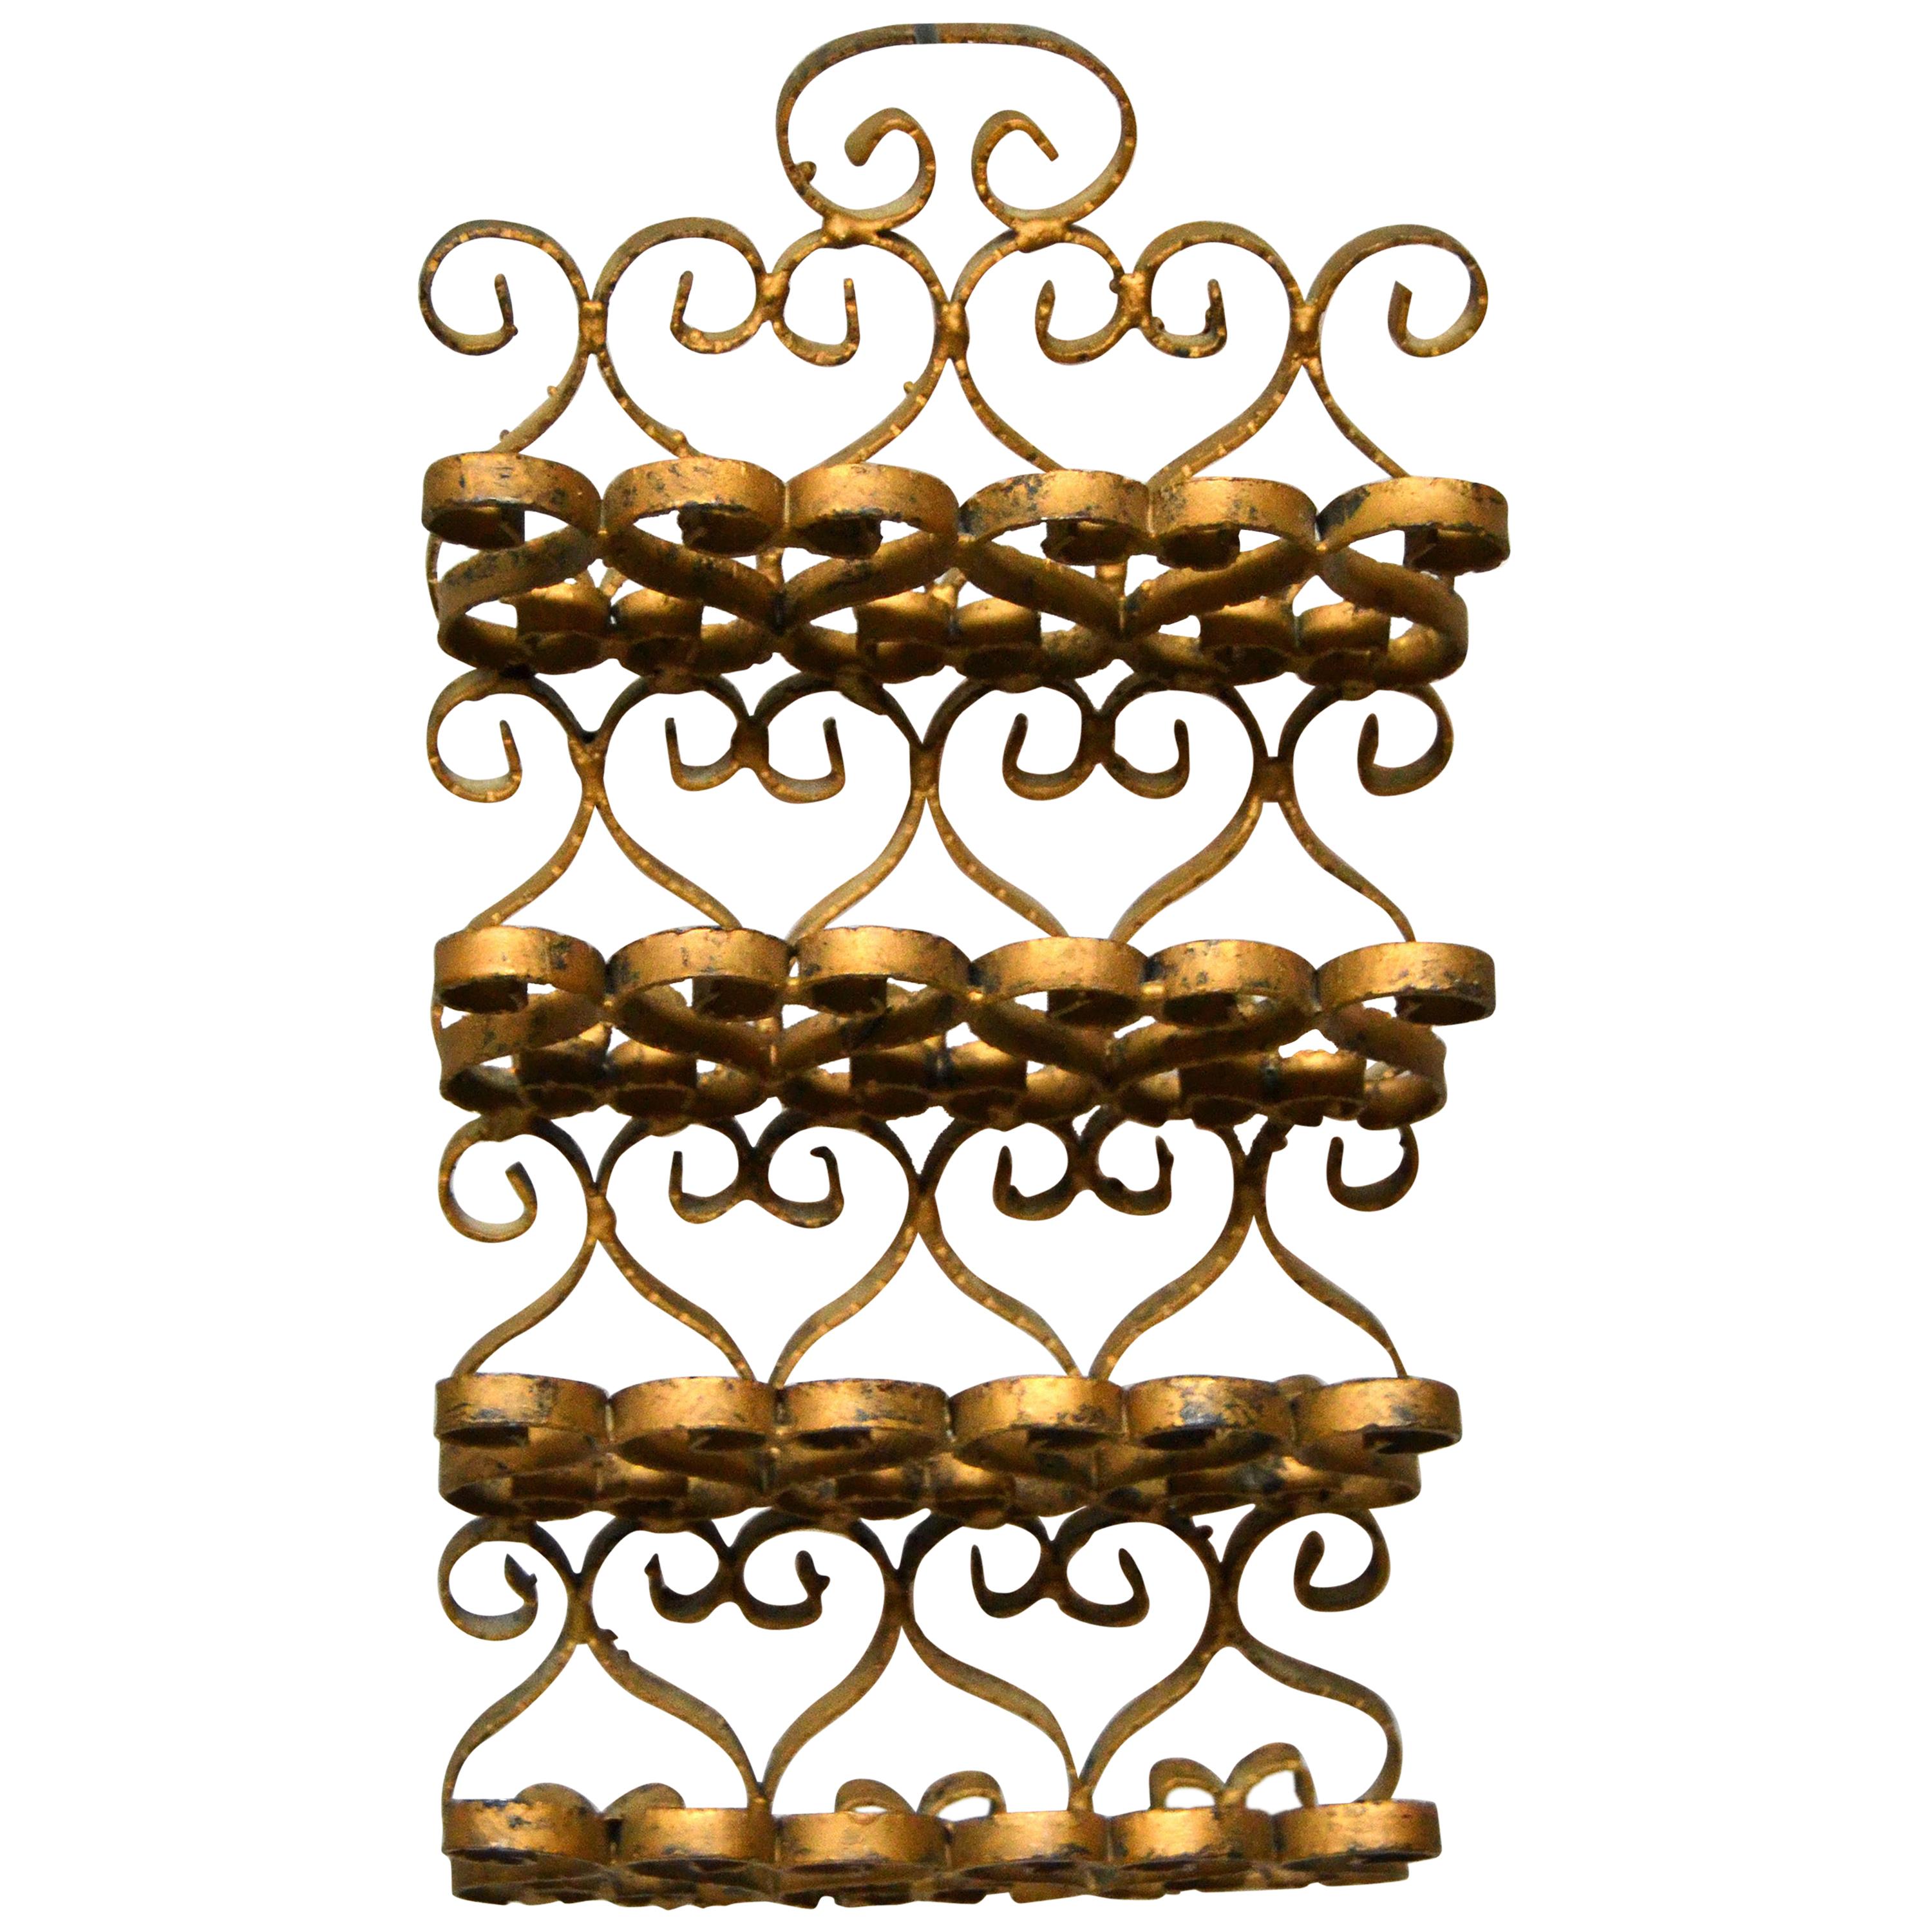 Art Nouveau Whimsical Handcrafted Golden Wrought Iron Letter, Recipe Organizer